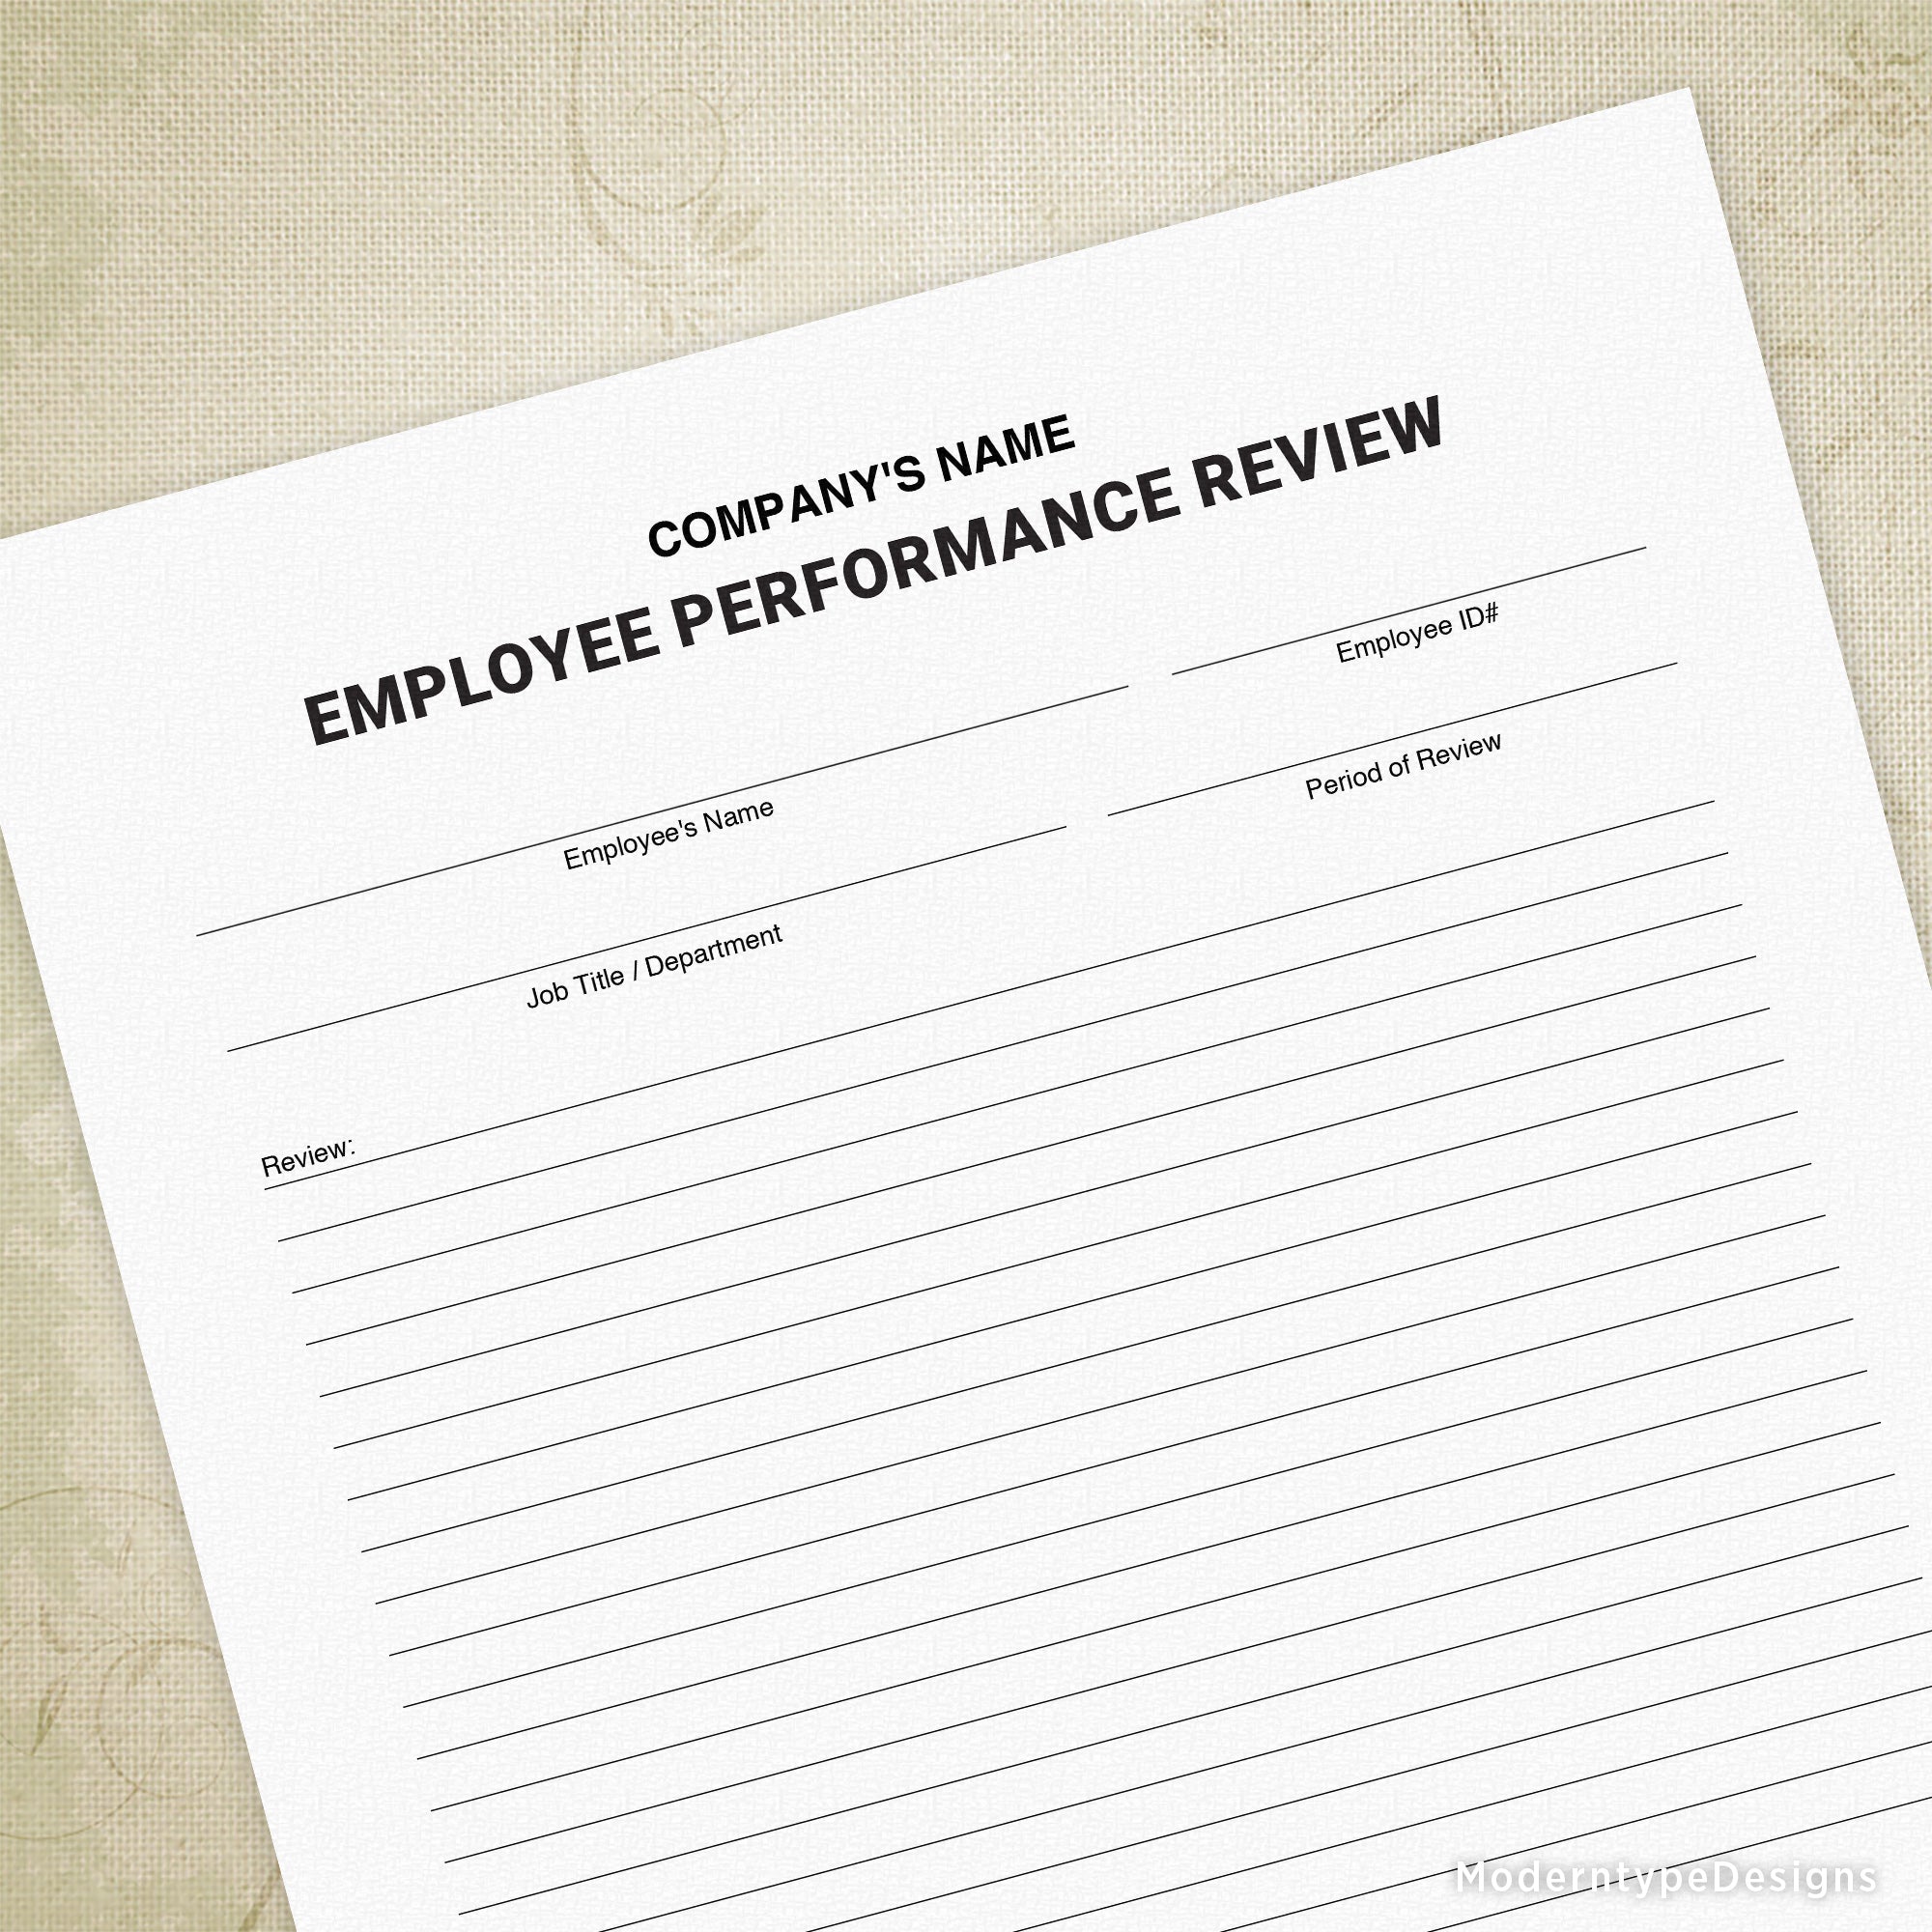 Employee Performance Review Printable, Personalized